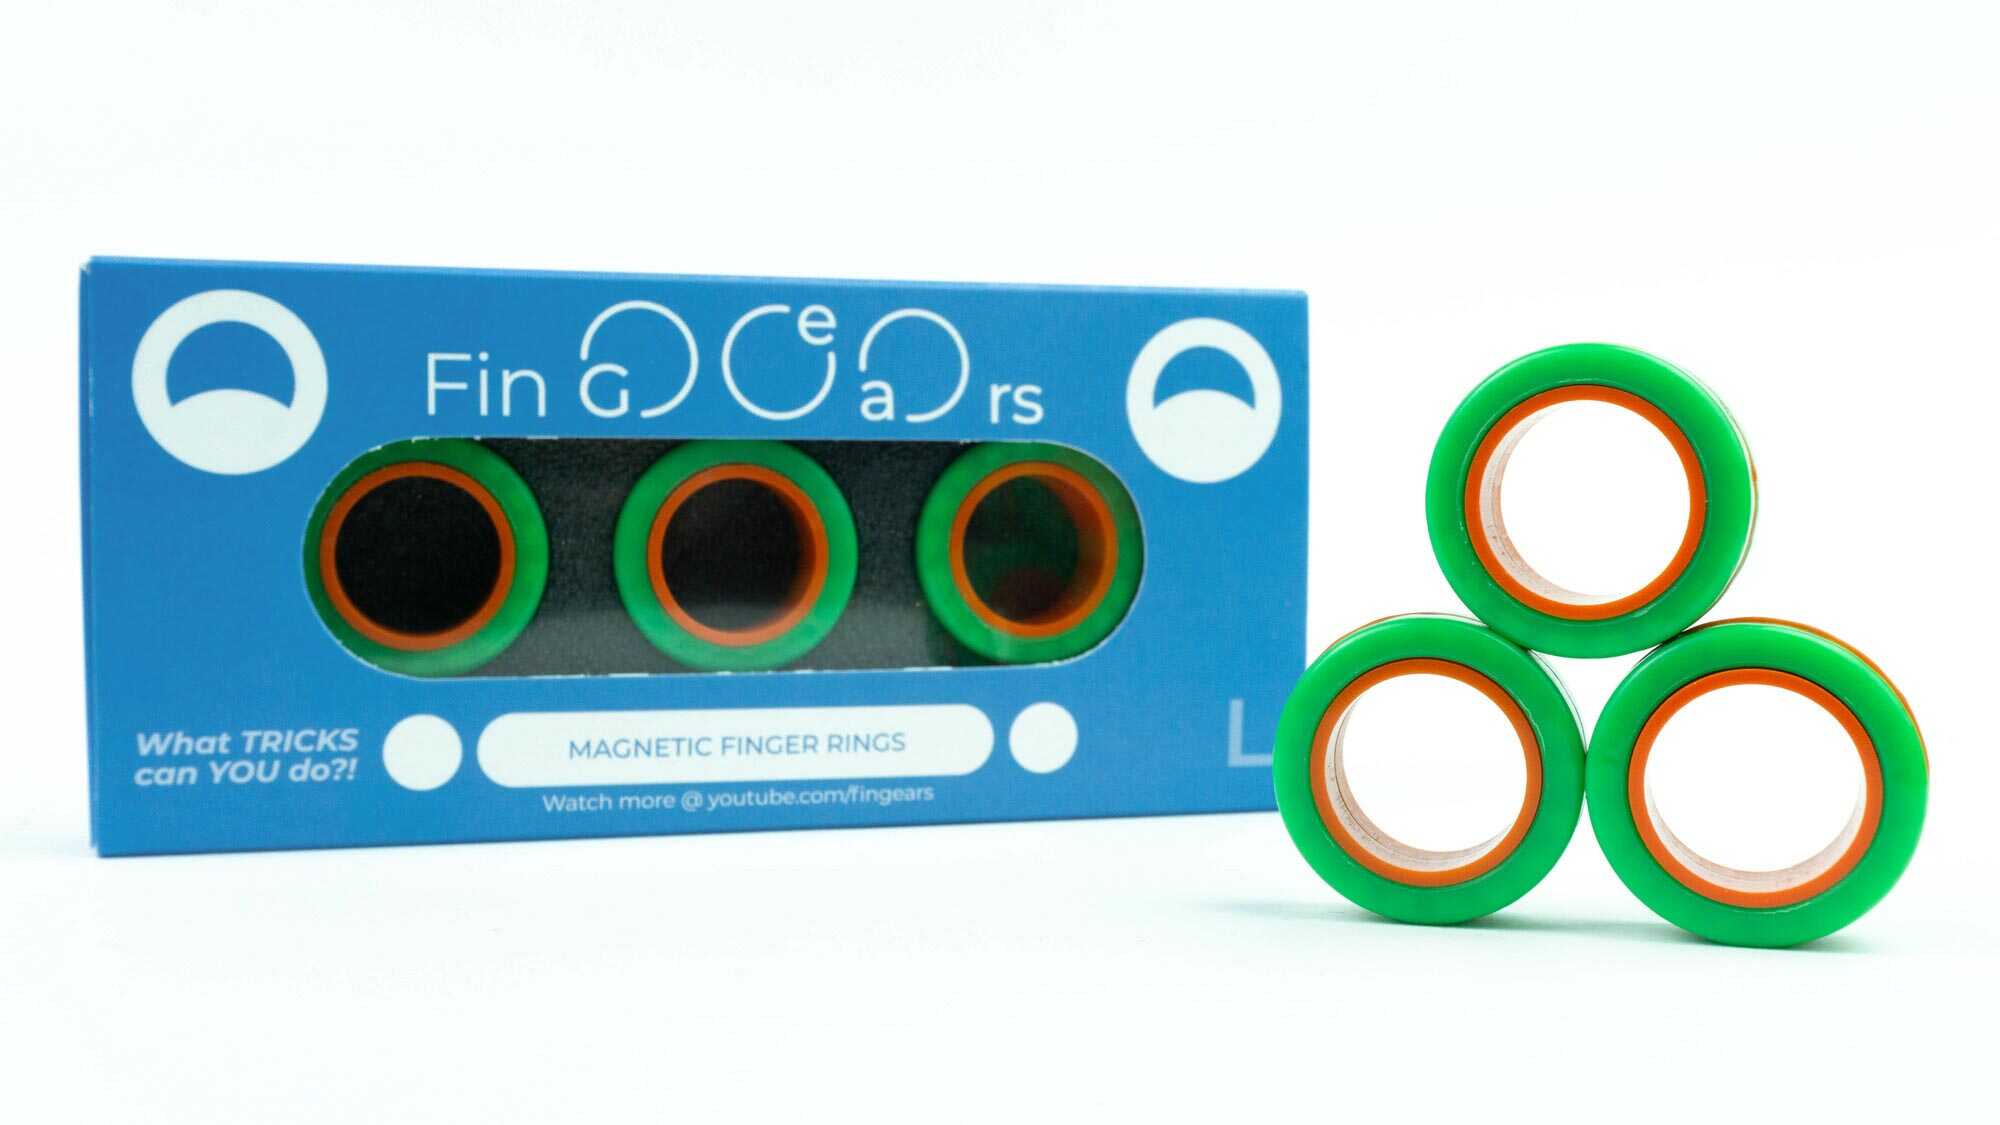 FinGears magnetic rings movement starting. Girls and guys as well as adults  who want something of their own to fiddle with. Goodbye doodling, hello...  | By Learning Express Toys Lake Zurich serving